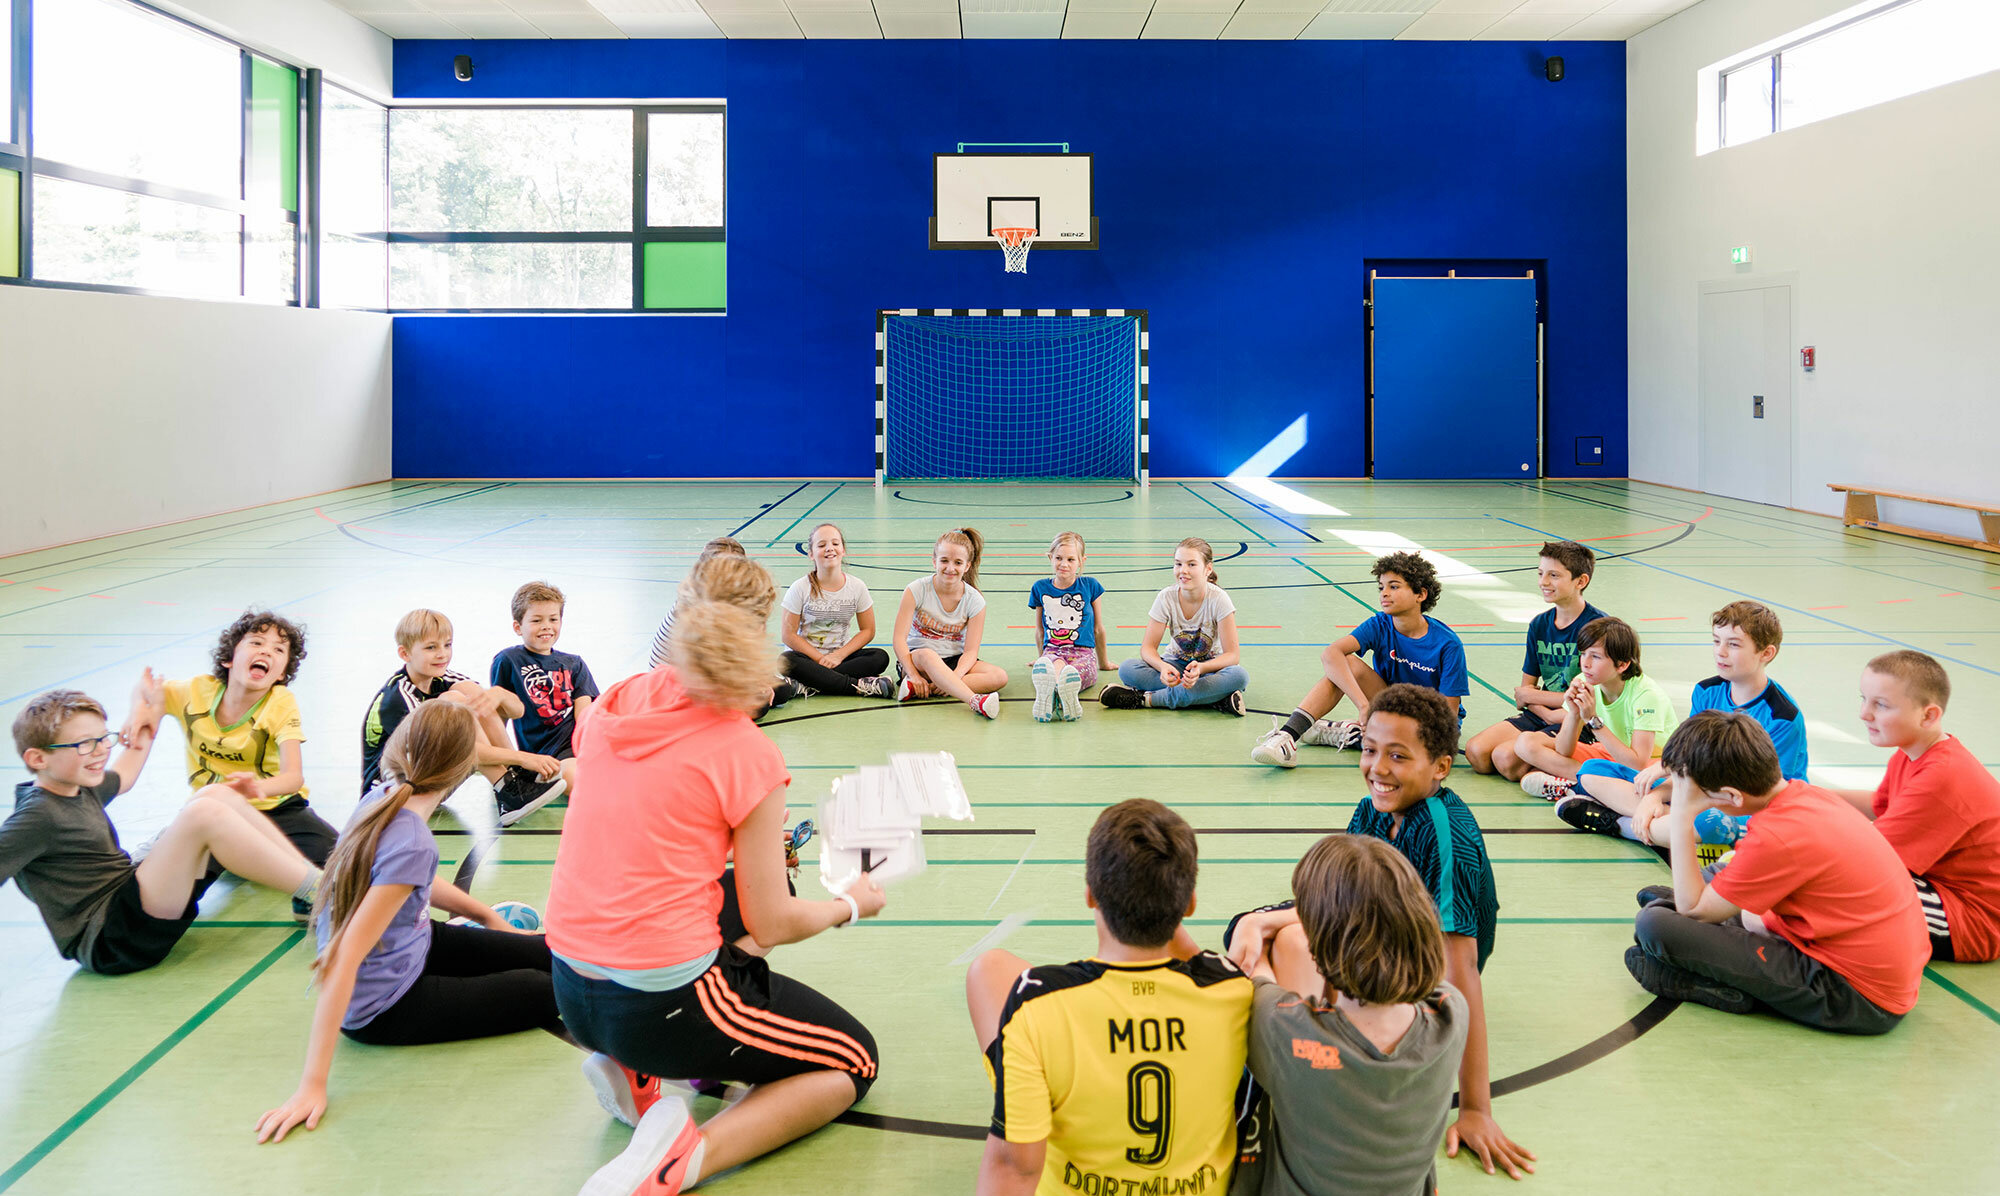 In a modern gymnasium, a sports teacher gathers her students seated in a circle and gives instructions.